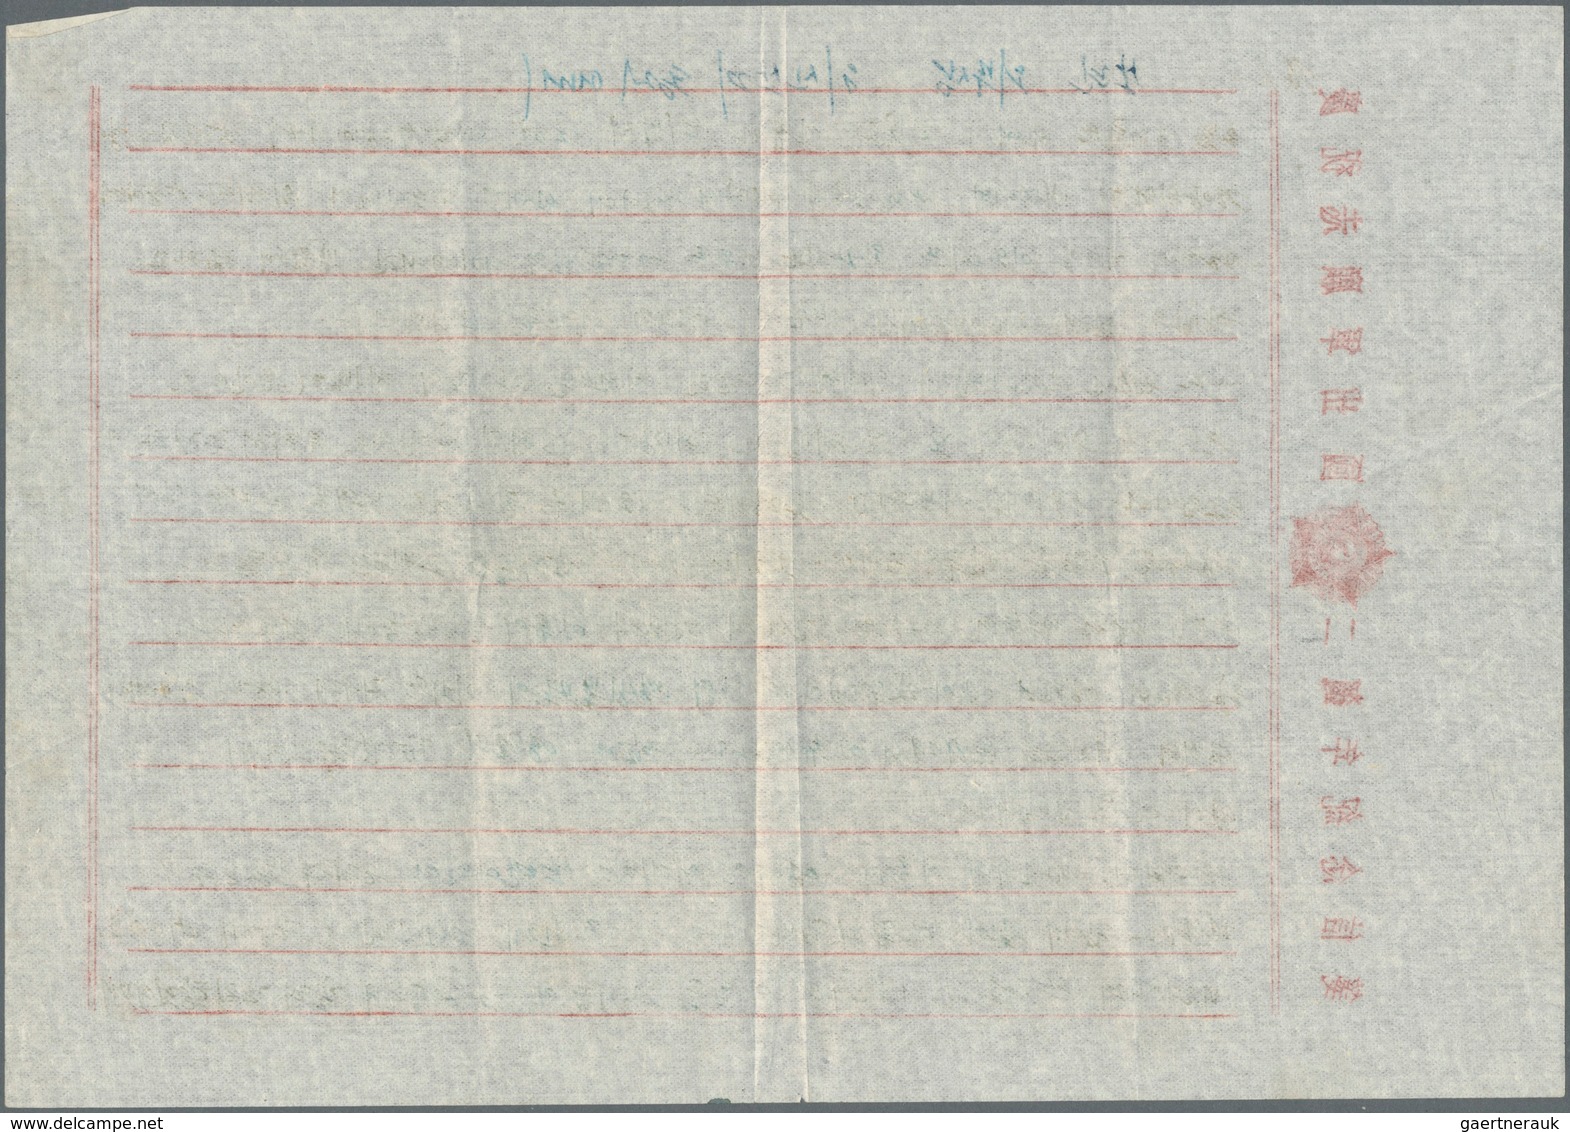 09230 Korea-Nord: 1952/55, three field post covers of PR China, so called volunteer corps in Korea, used t